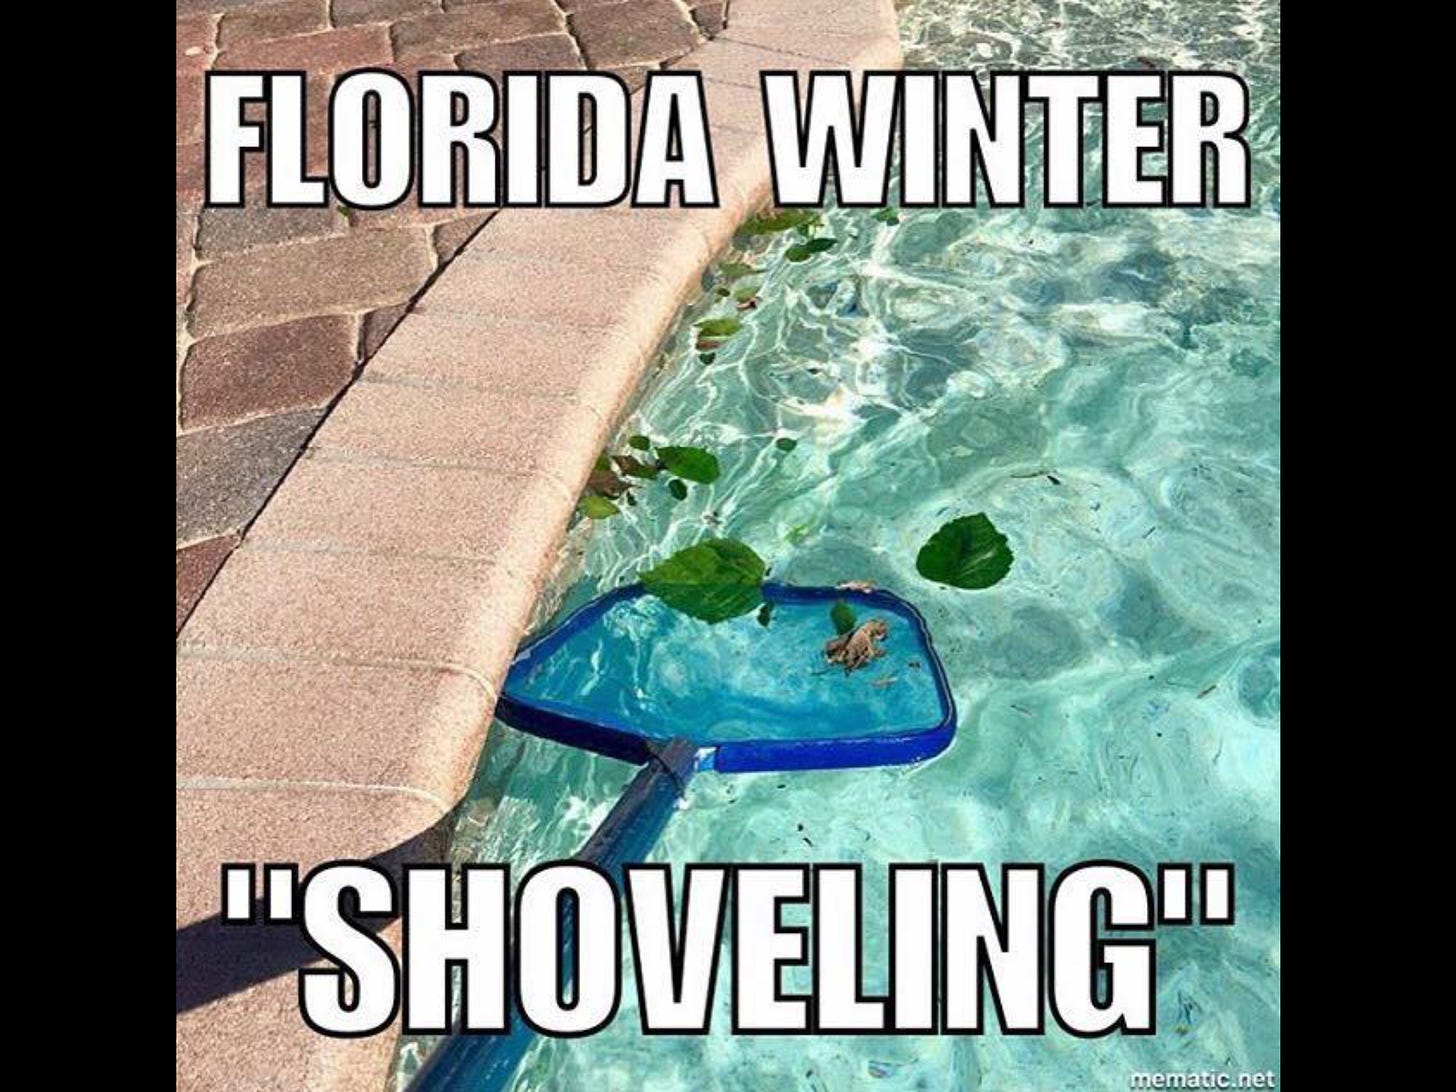 Pin by Kelly Day on HUMOR | Florida, Florida weather, Florida funny